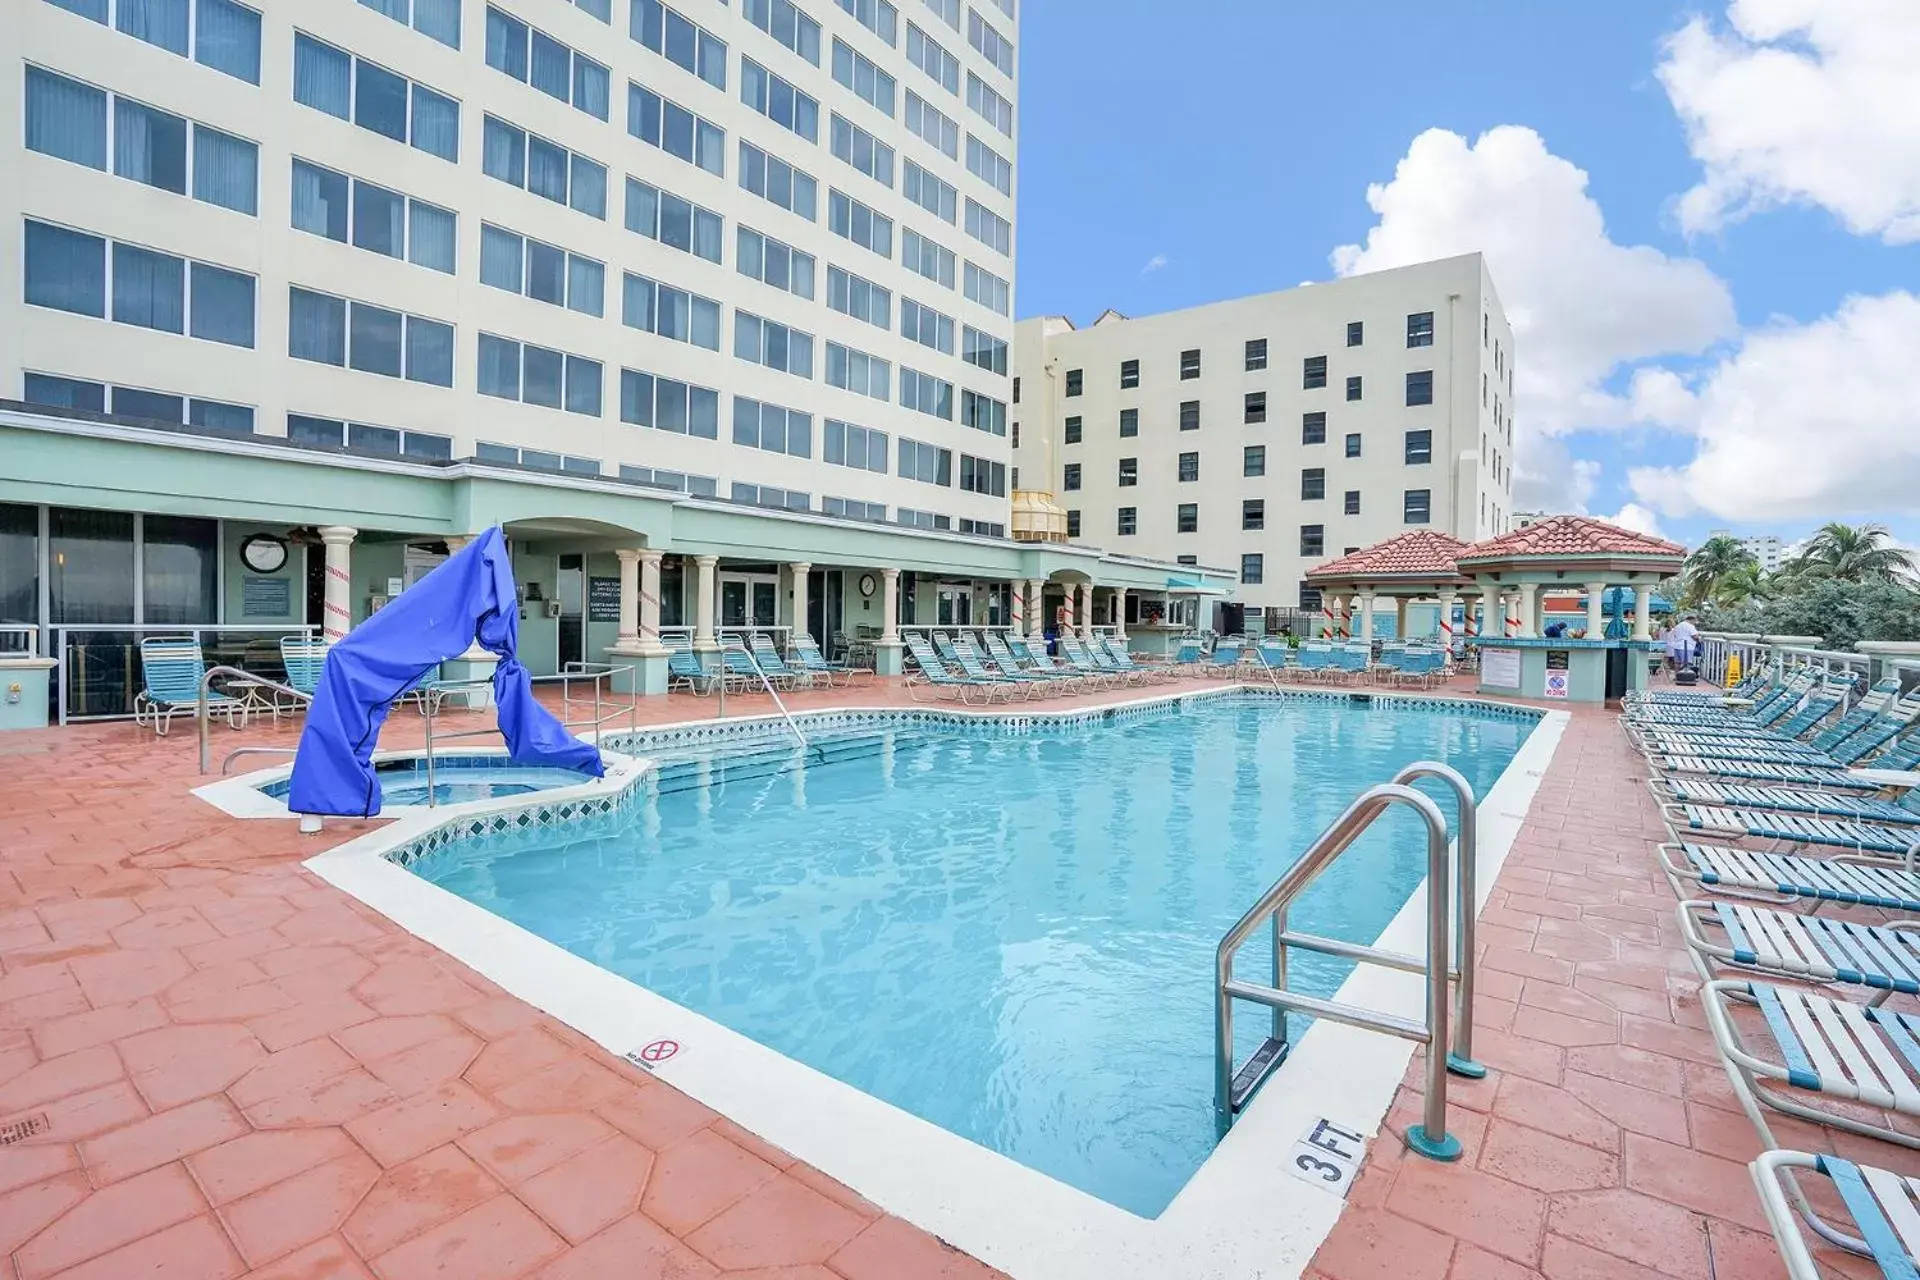 Swimming Pool in Hollywood Beach Tower by Capital Vacations